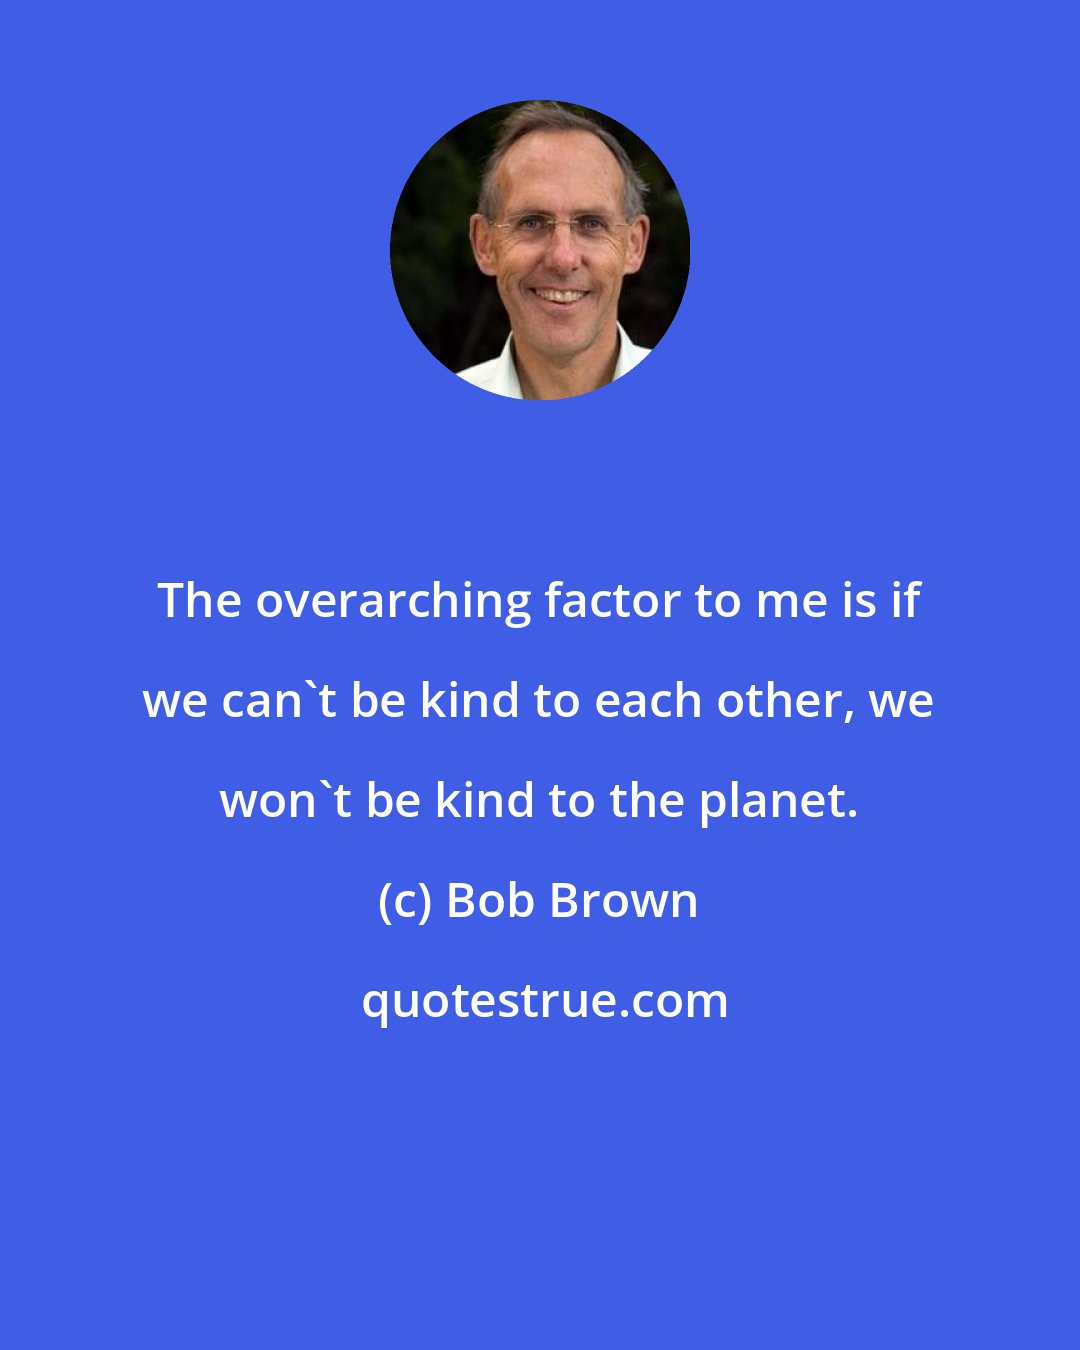 Bob Brown: The overarching factor to me is if we can't be kind to each other, we won't be kind to the planet.